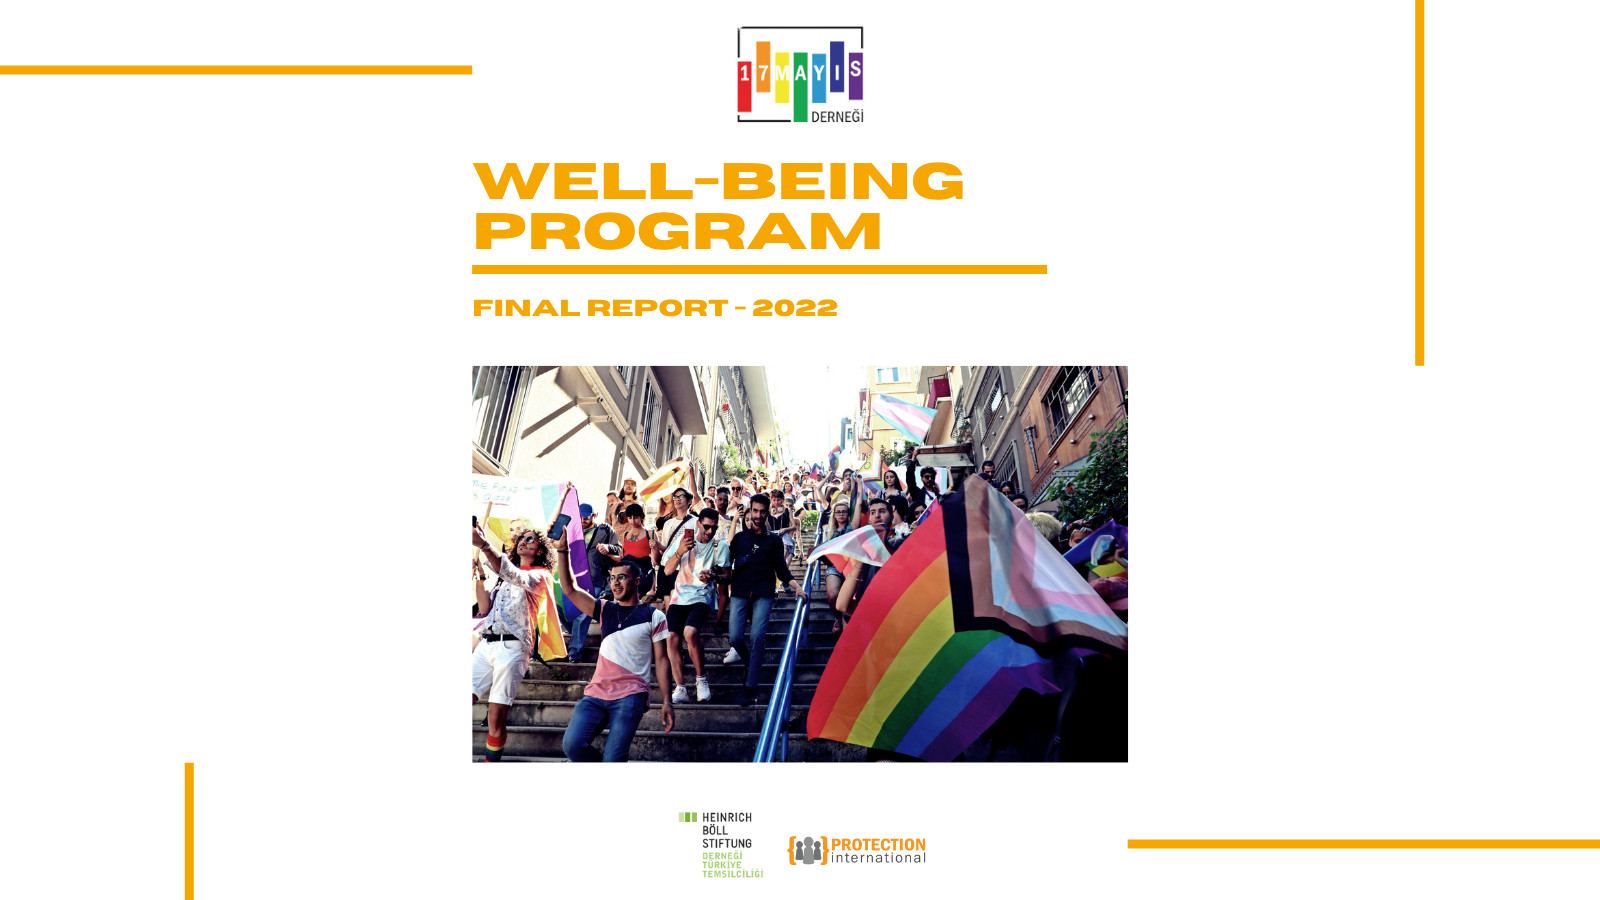 Well-Being Program 2022 Final Report Has Been Released! - May 17 Association